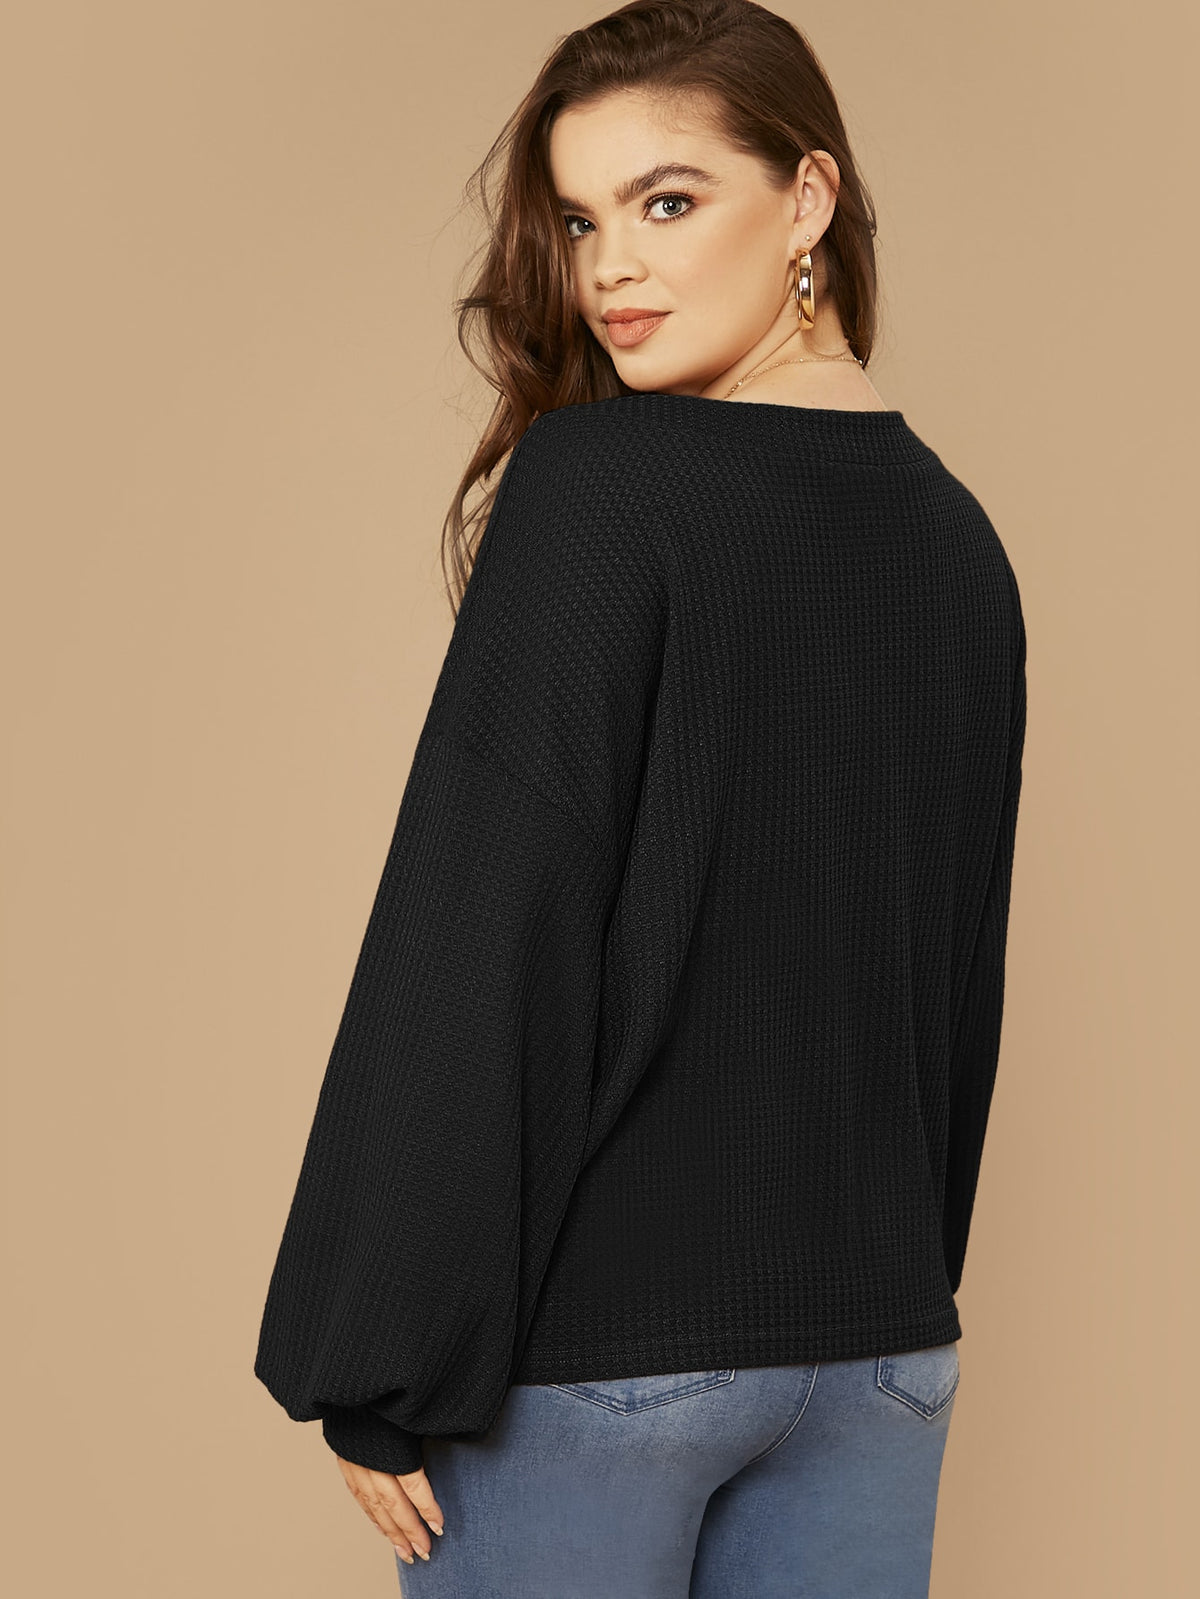 Plus Size Waffle Knit Top - 